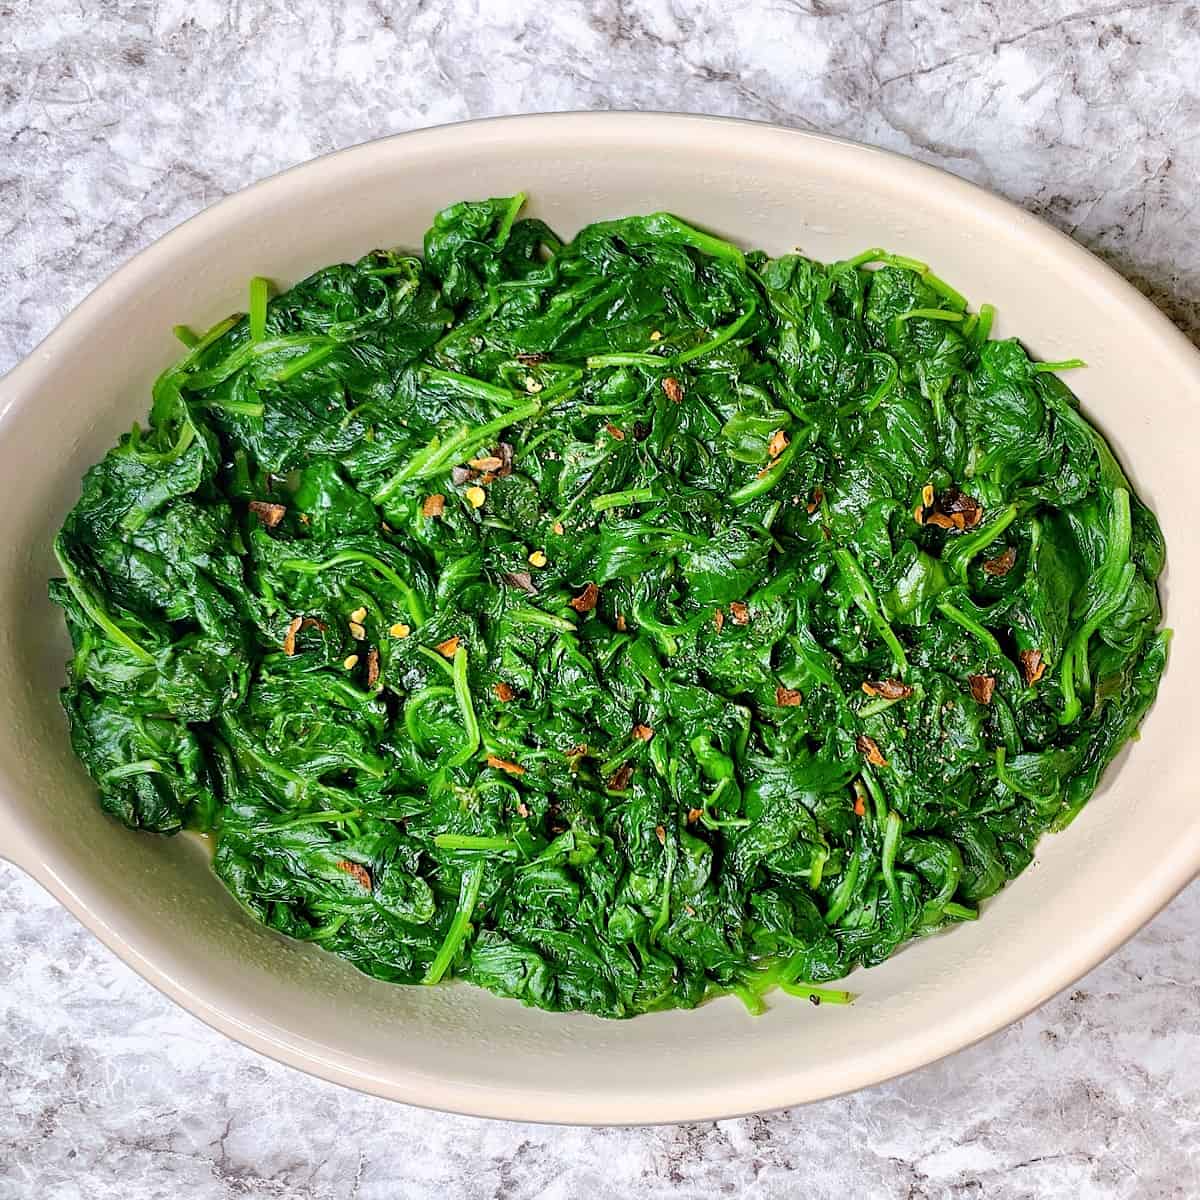 Casserole dish filled with sautéed spinach and crushed red pepper